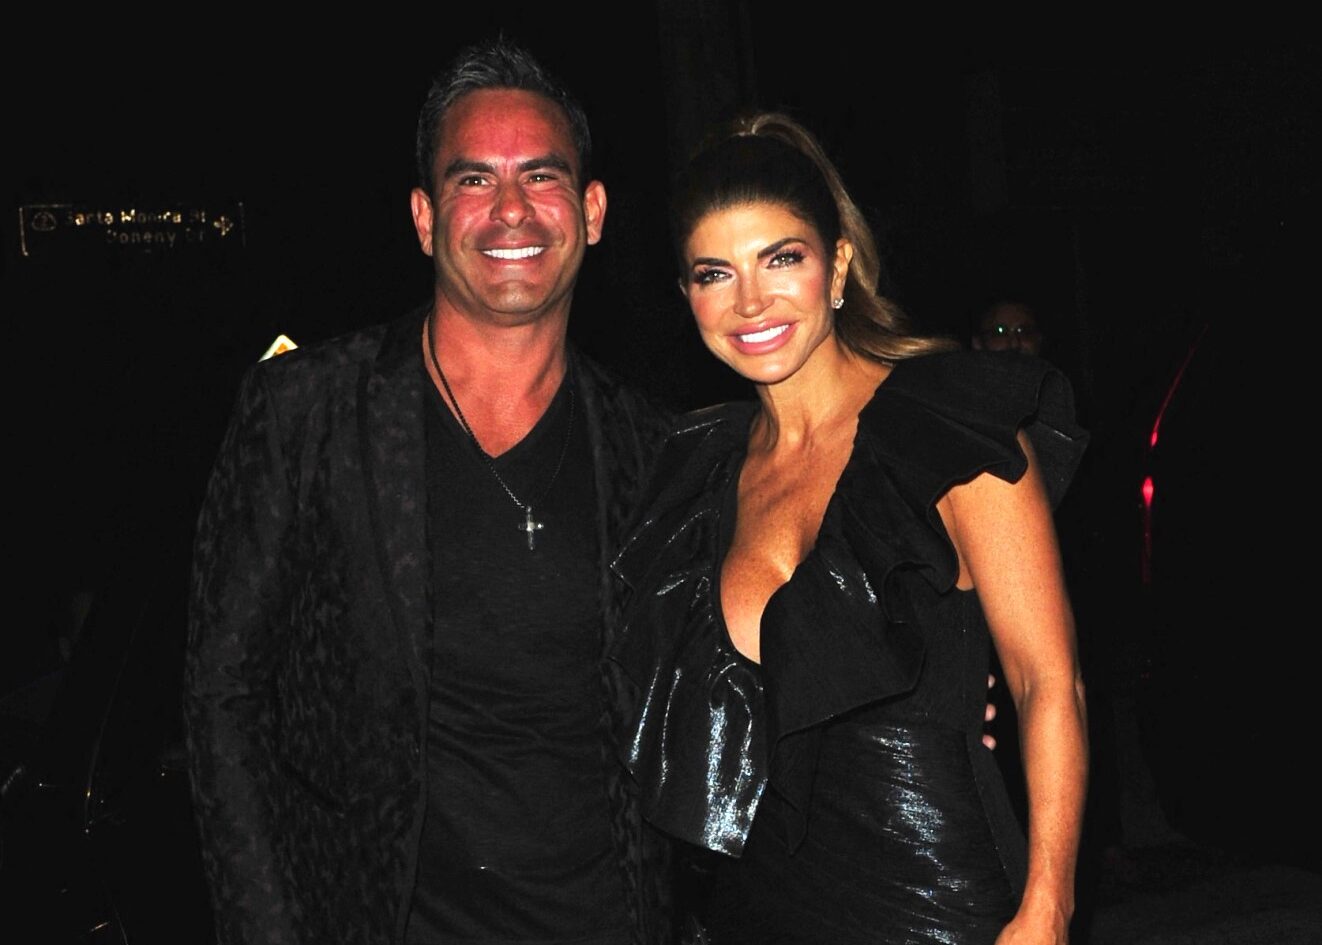 REPORT: RHONJ star Teresa Giudice's wedding is "in trouble" like Luis Ruelas' "true colors" Show and "Red flags" Surface, plus Teresa's lawyer denies the report